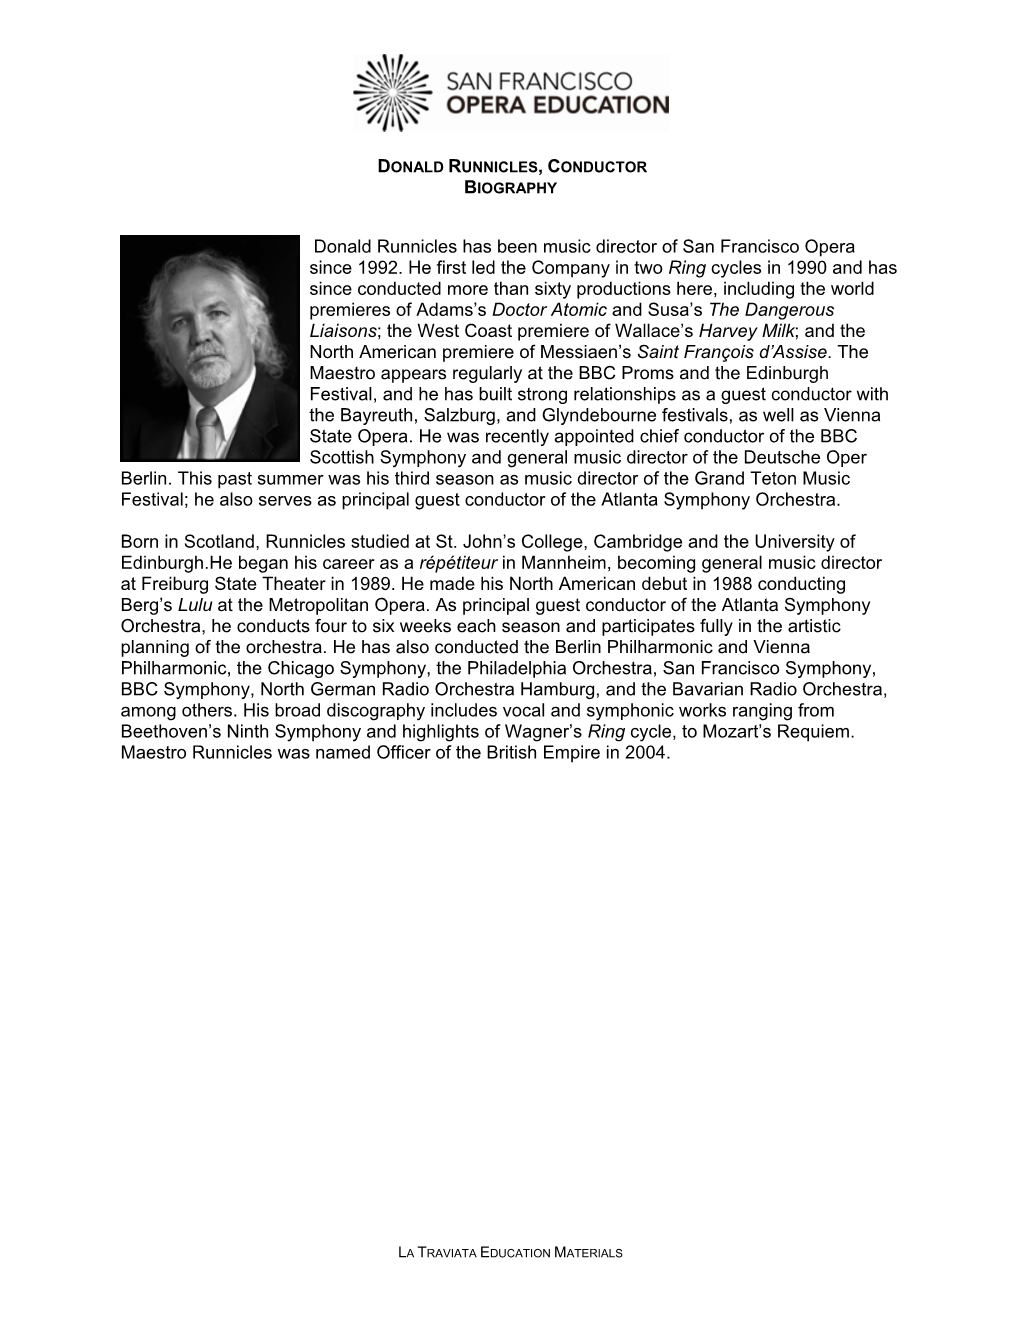 Donald Runnicles, Conductor Biography